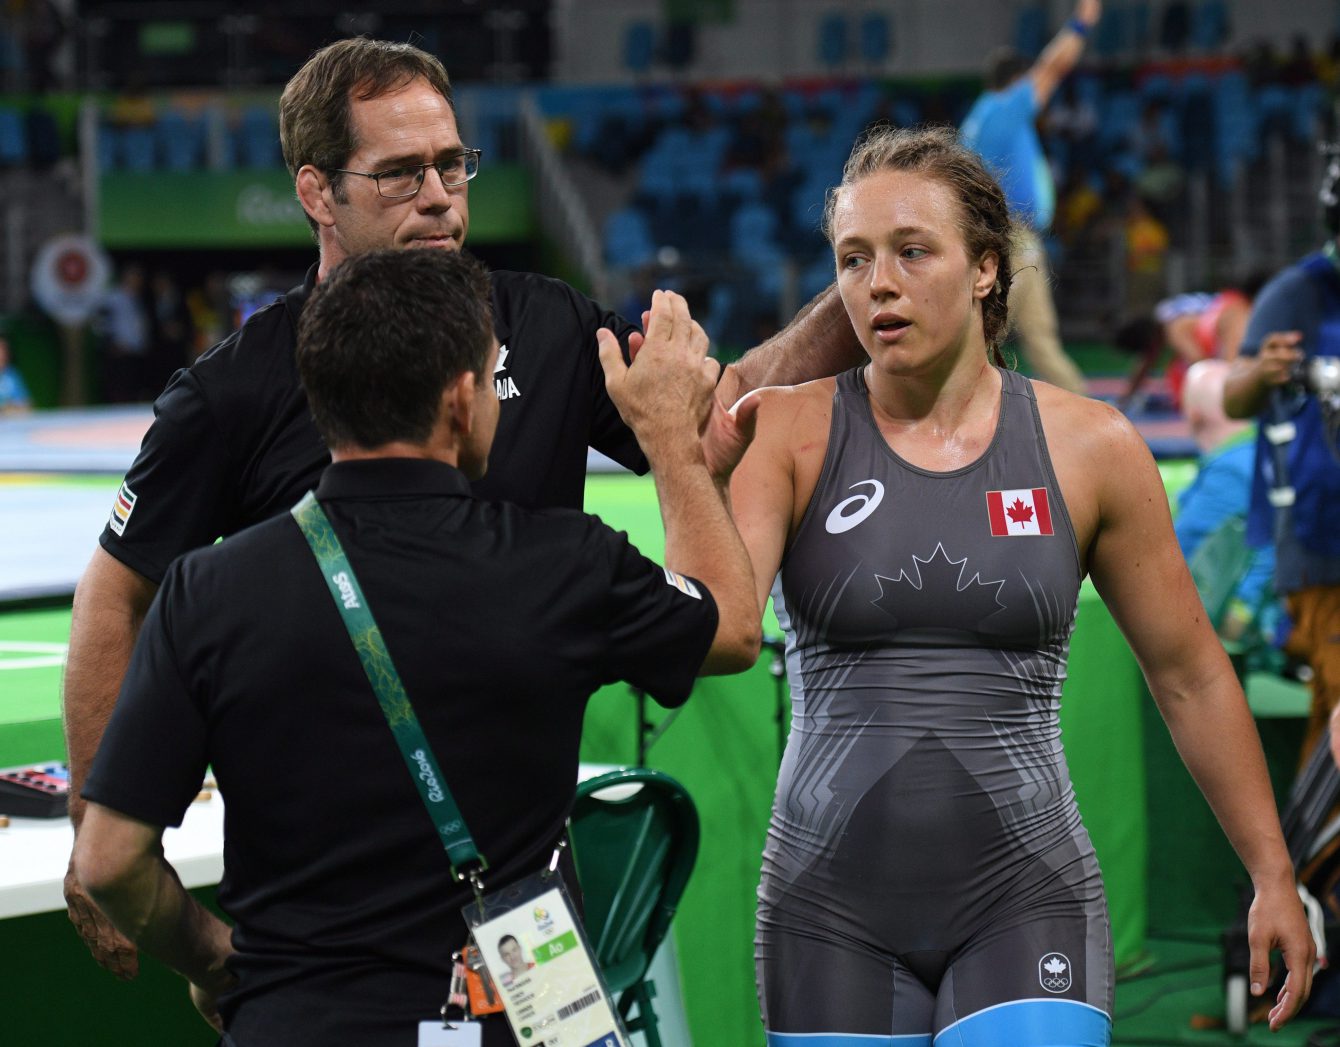 Canada's Dori Yeats is congratulated by her coaches after a win over Turkey's Buse Tosun in the women's freestyle 69kg repechage round at the 2016 Olympic Summer Games in Rio de Janeiro, Brazil on Wednesday, Aug. 17, 2016. THE CANADIAN PRESS/Sean Kilpatrick